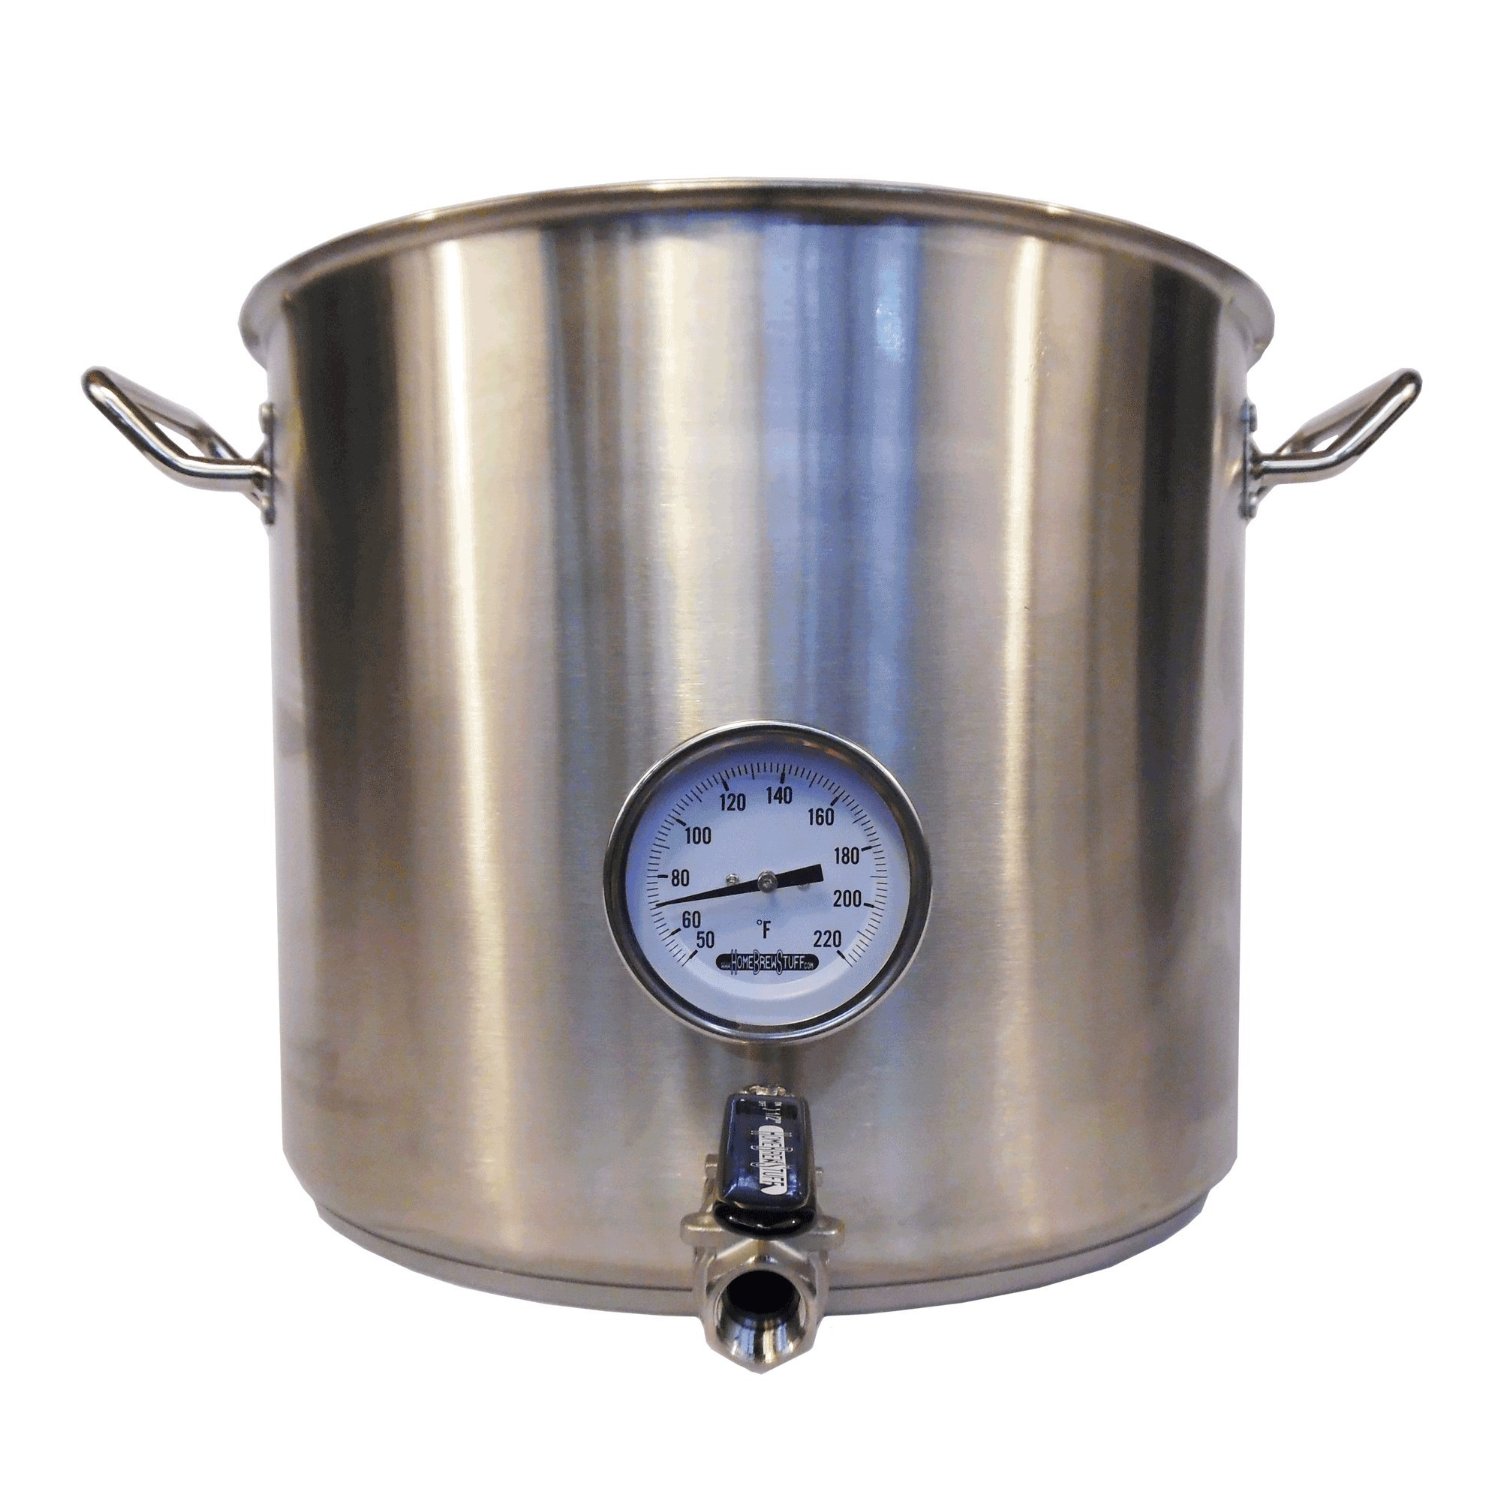 Stainless Steel Kettle with Welded Valve, Thermometer and Bazooka Screen (HomeBrewStuff) (32 QT) (8 gallon) 